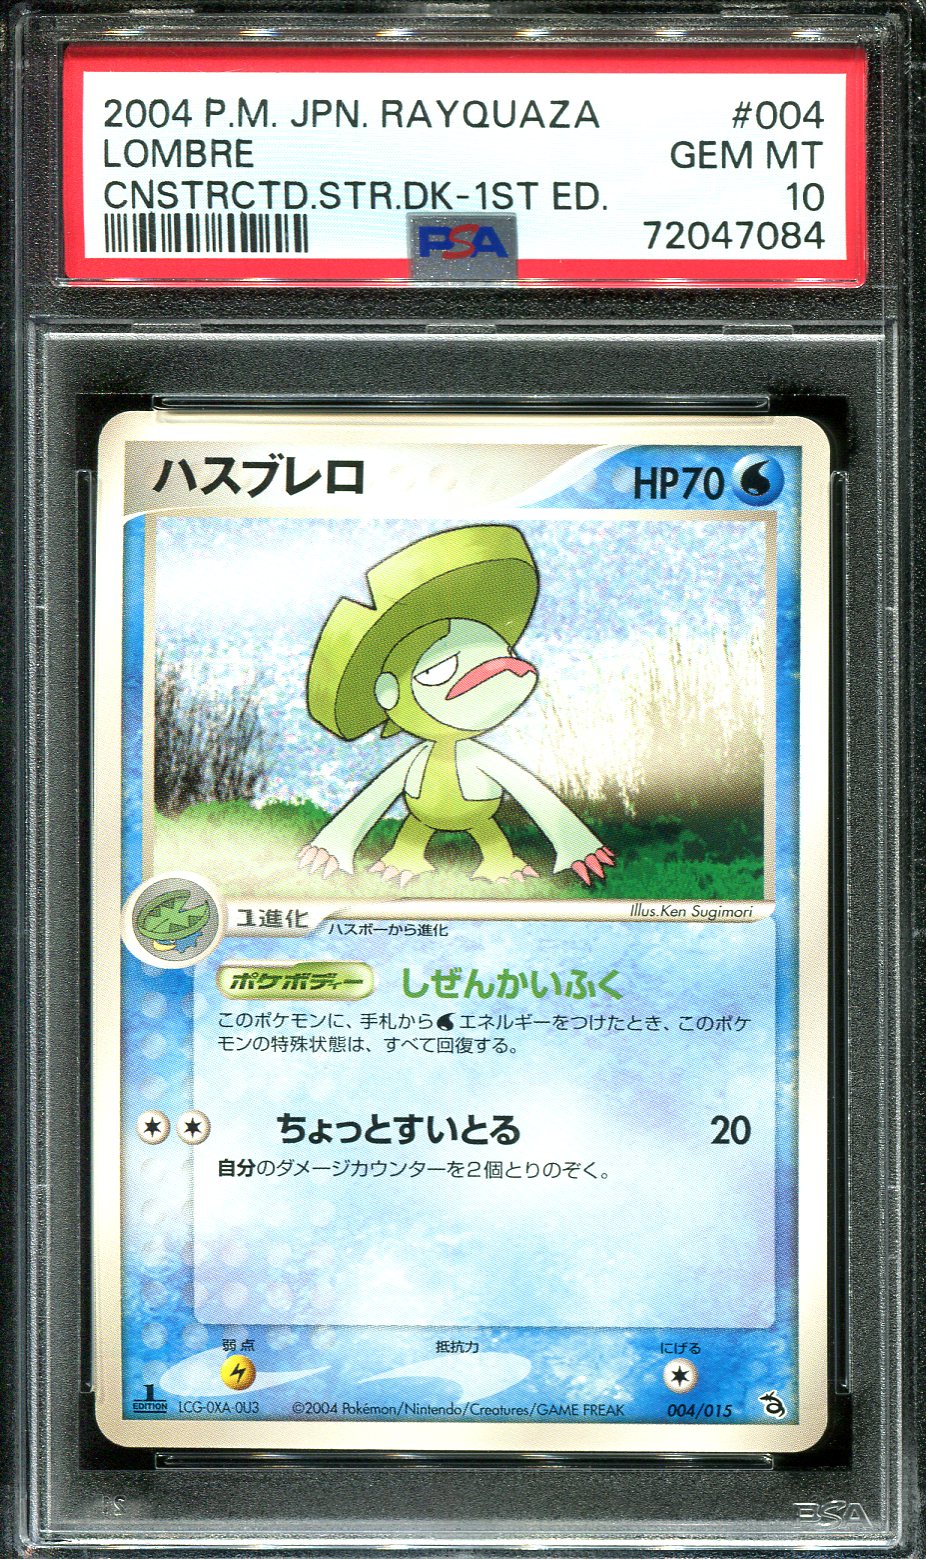 LOMBRE 004/015 PSA 10 POKEMON CONSTRUCTED DECK RAYQUAZA JAPANESE